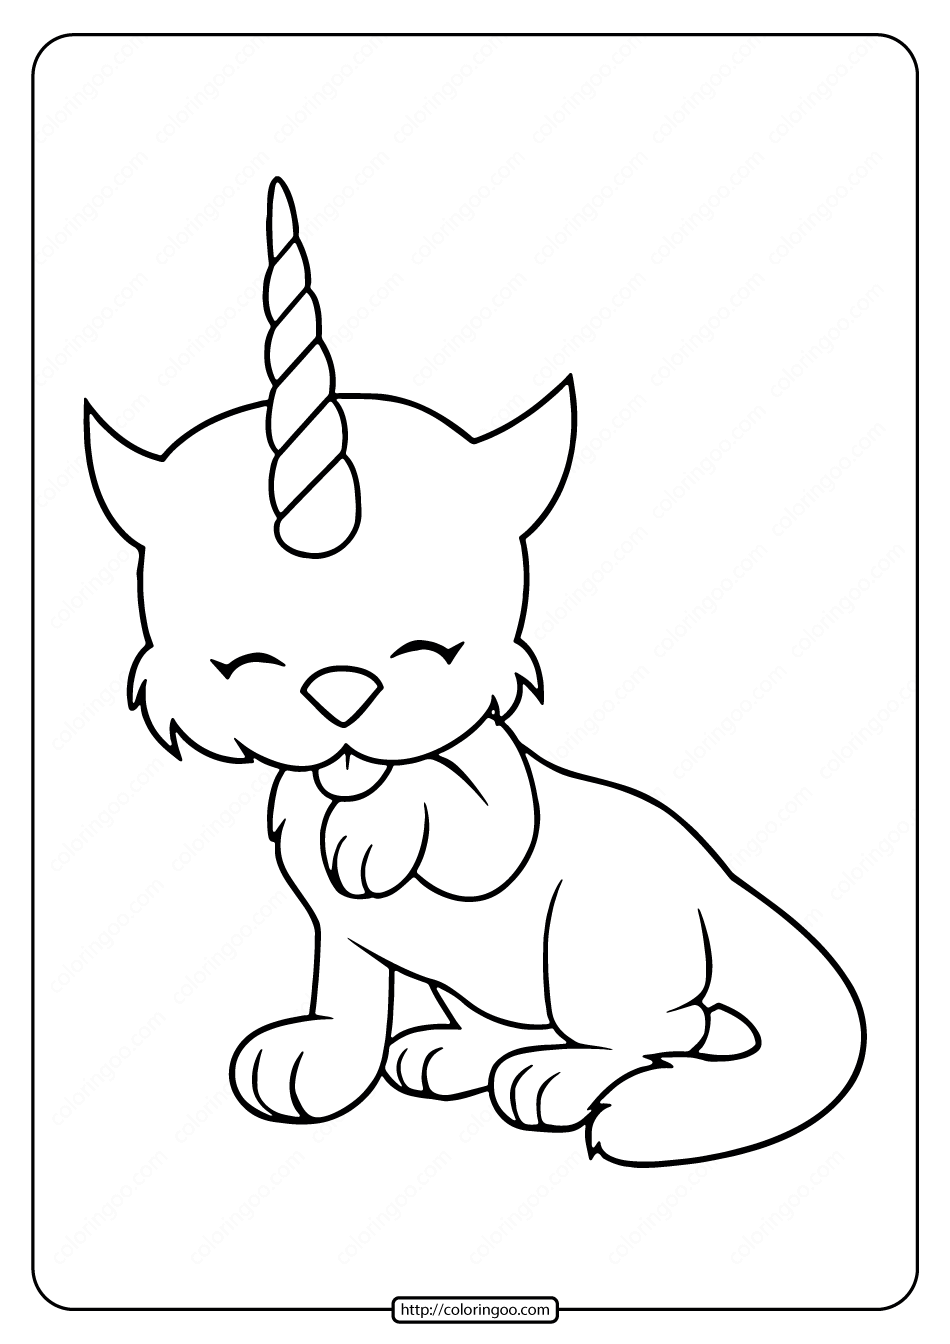 unicorn kitten pdf coloring pages